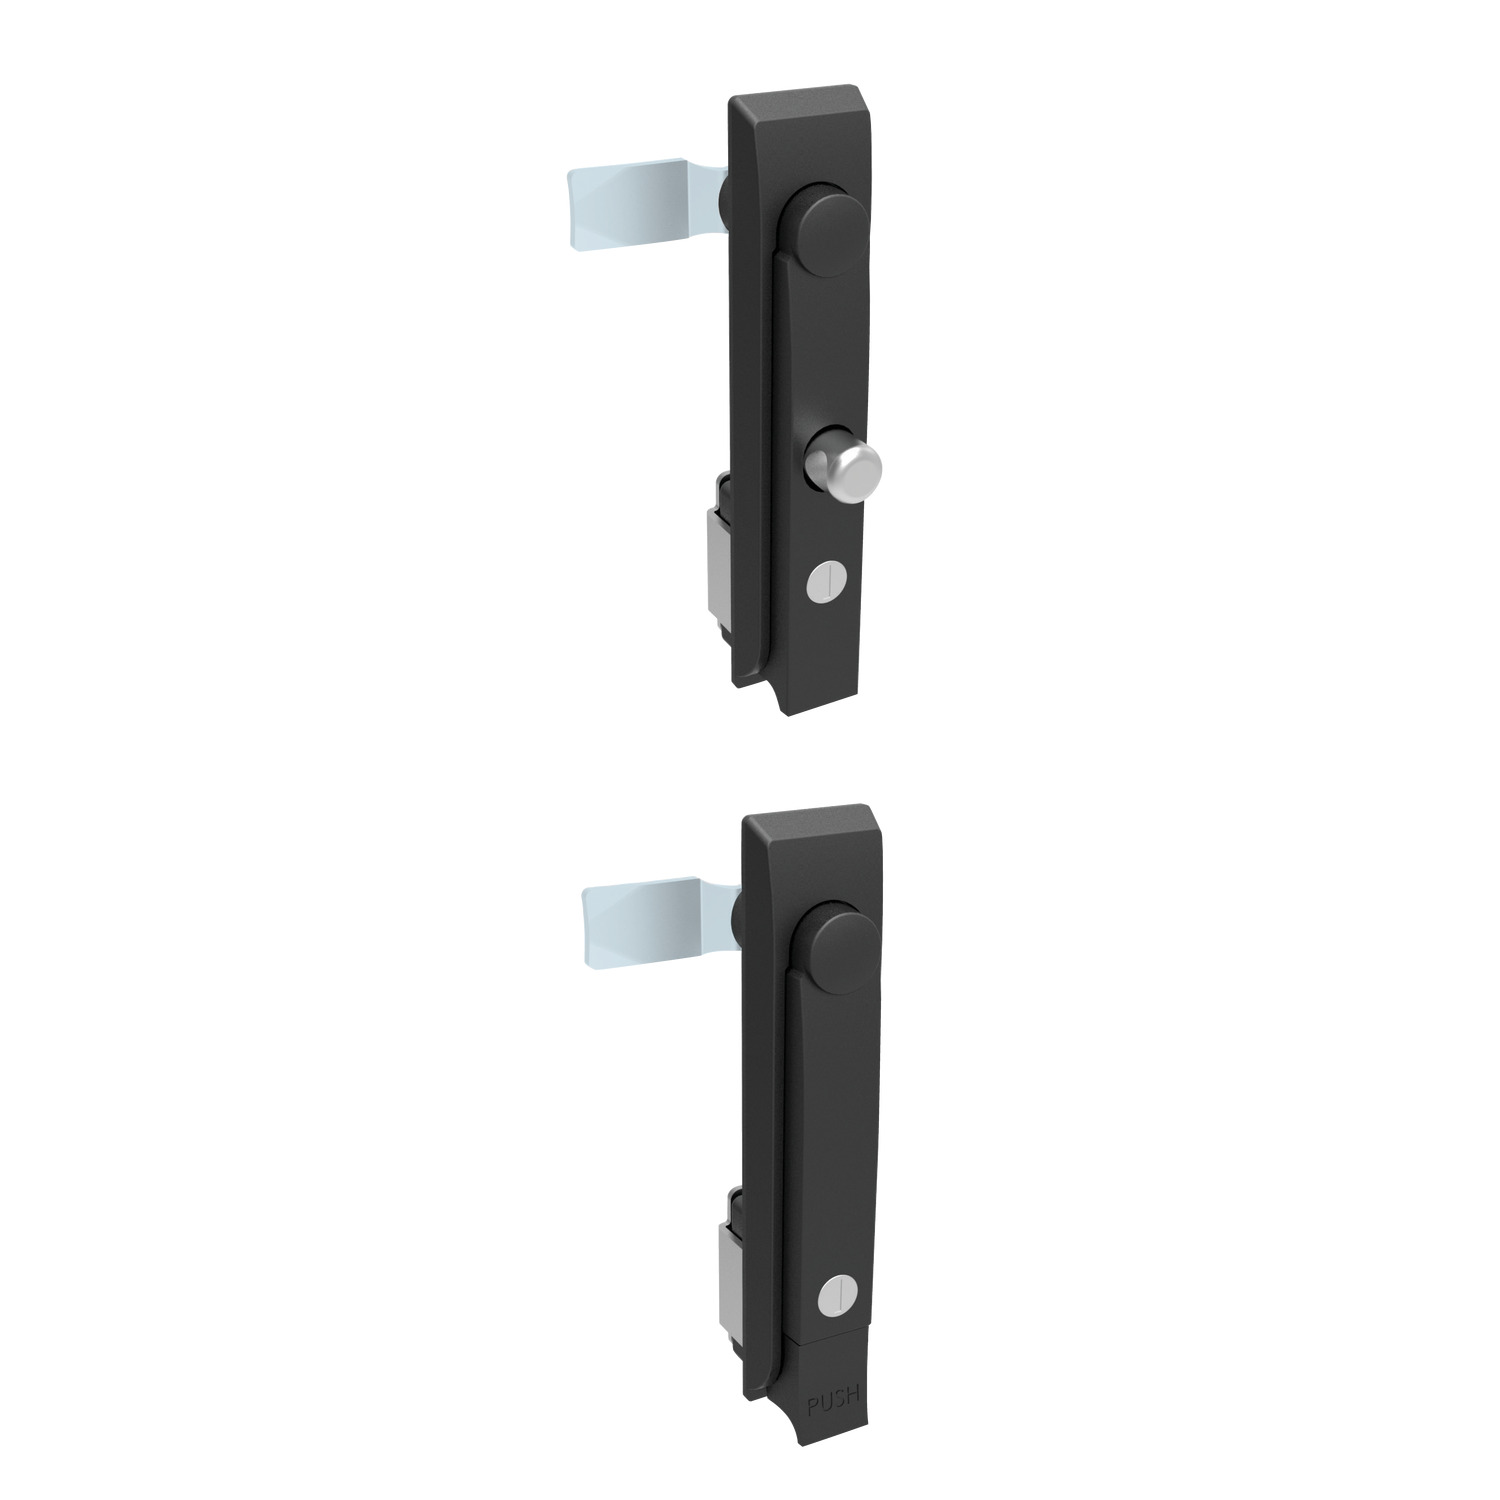 Swing Handles - Cam Control Available with or without a push handle to release the handle, this part comes with an optional padlock clasp that prohibits access to the lock